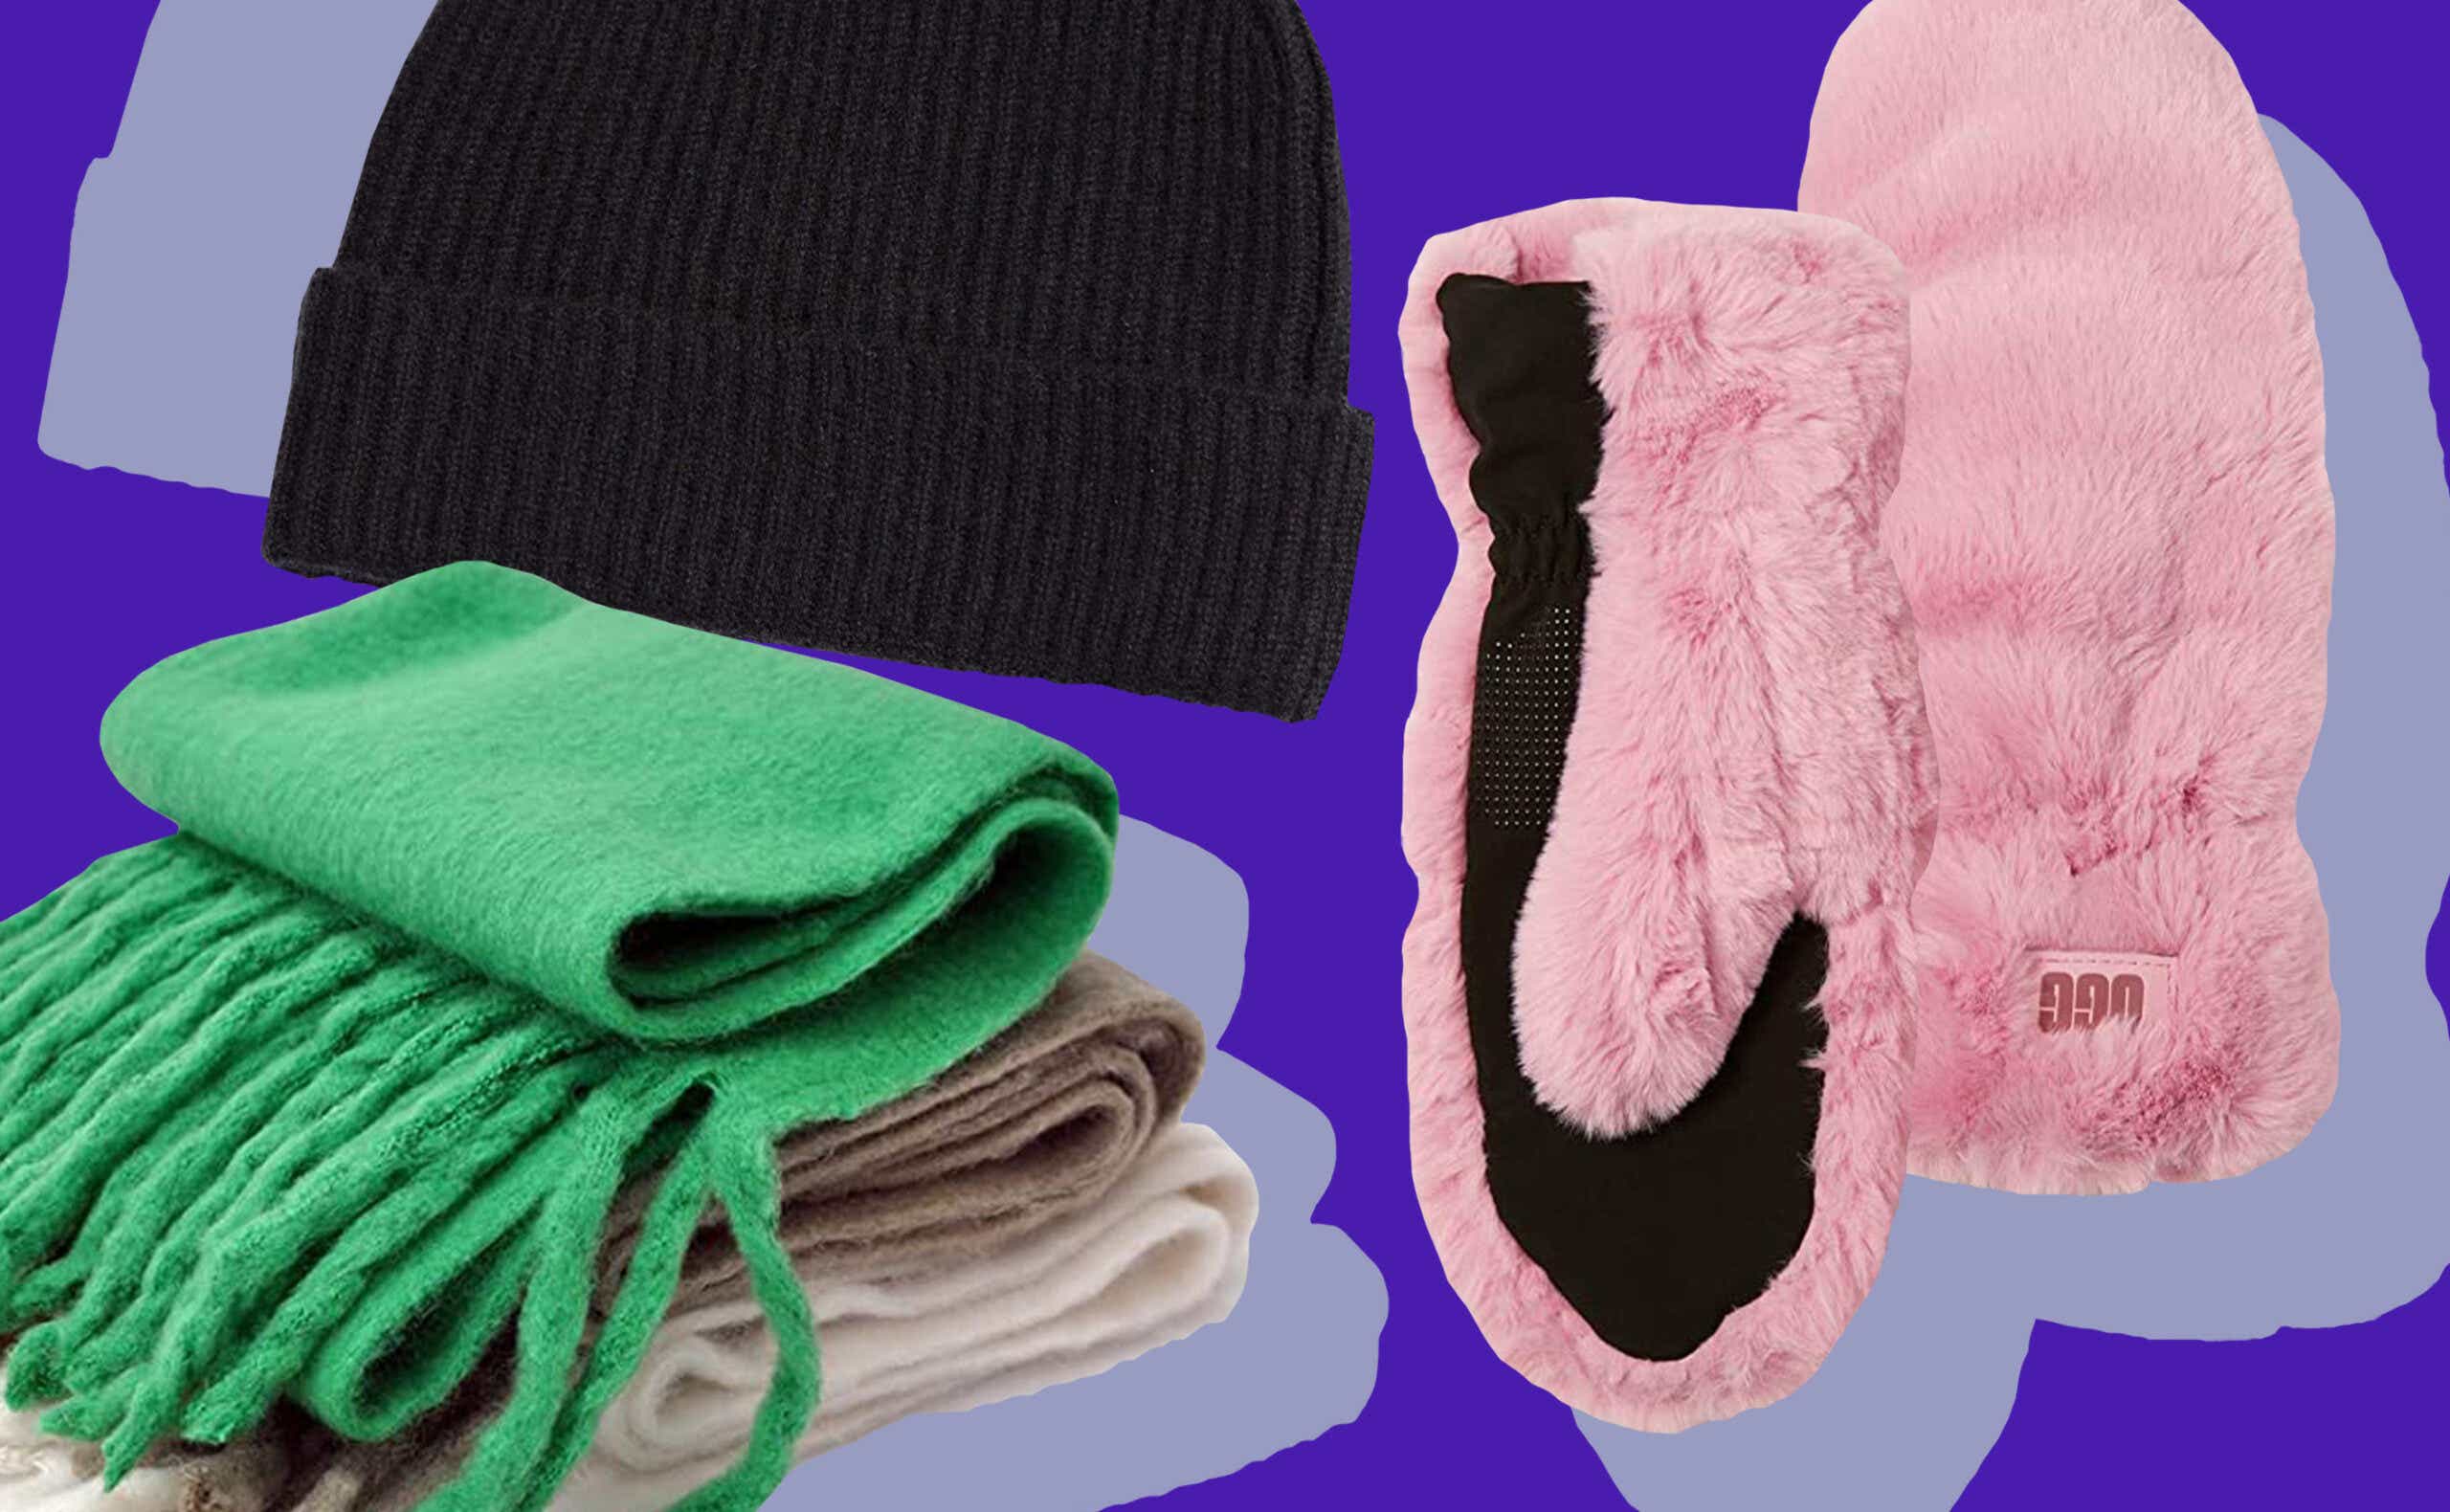 My Favorite New $25 Winter Headband + The Best Accessories for the Cold